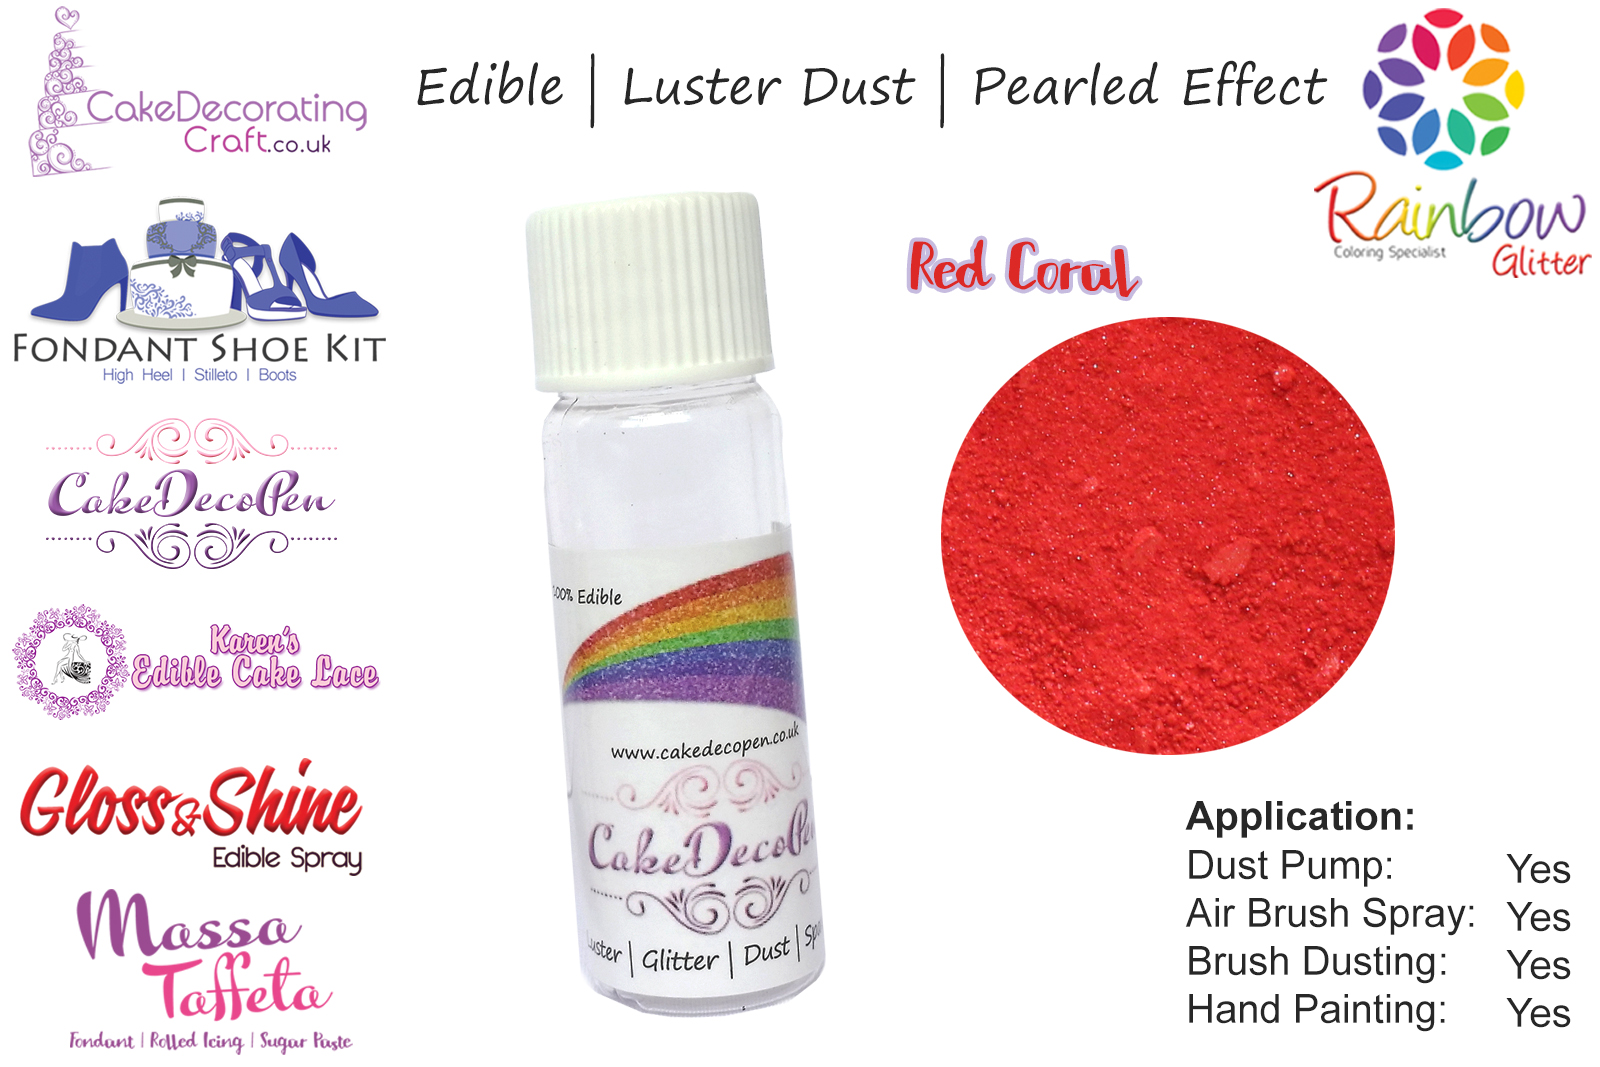 Red Coral | Pearled | Luster | Shimmer | Gloss | Edible Dust | 25 Gram Pot | Cake Decorating Craft